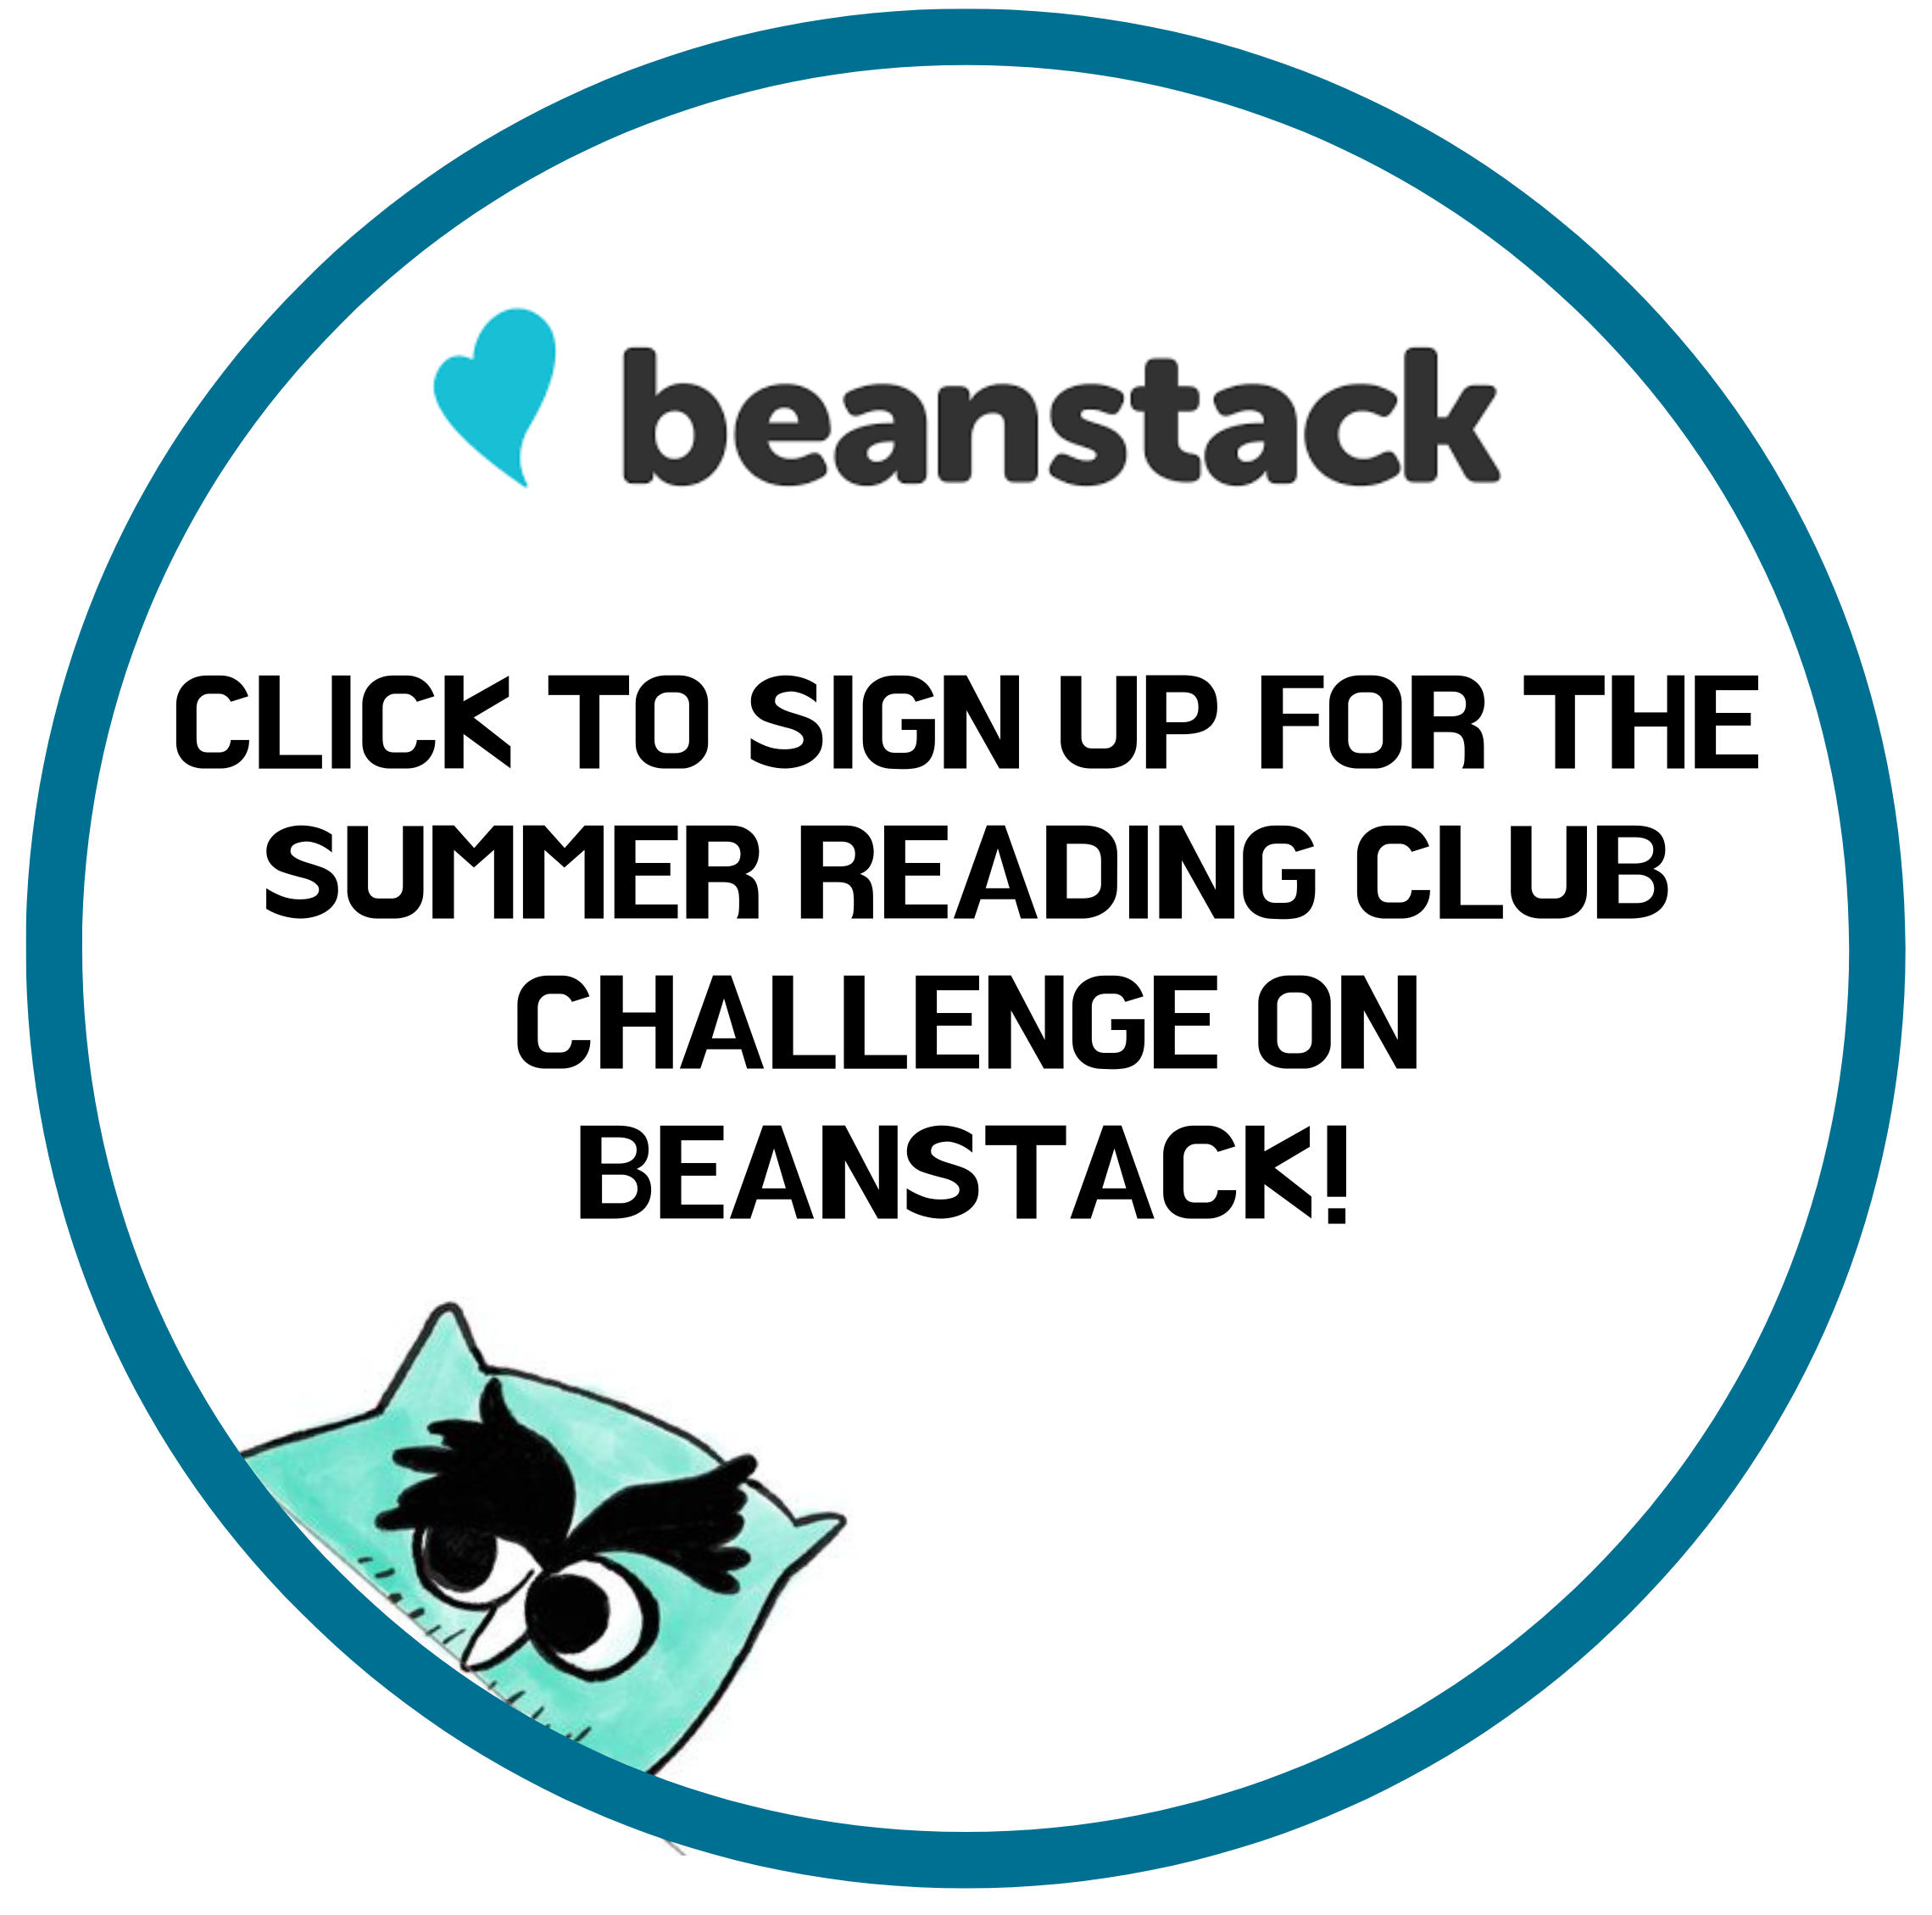 Click to sign up for the Summer Reading Challenge on Beanstack